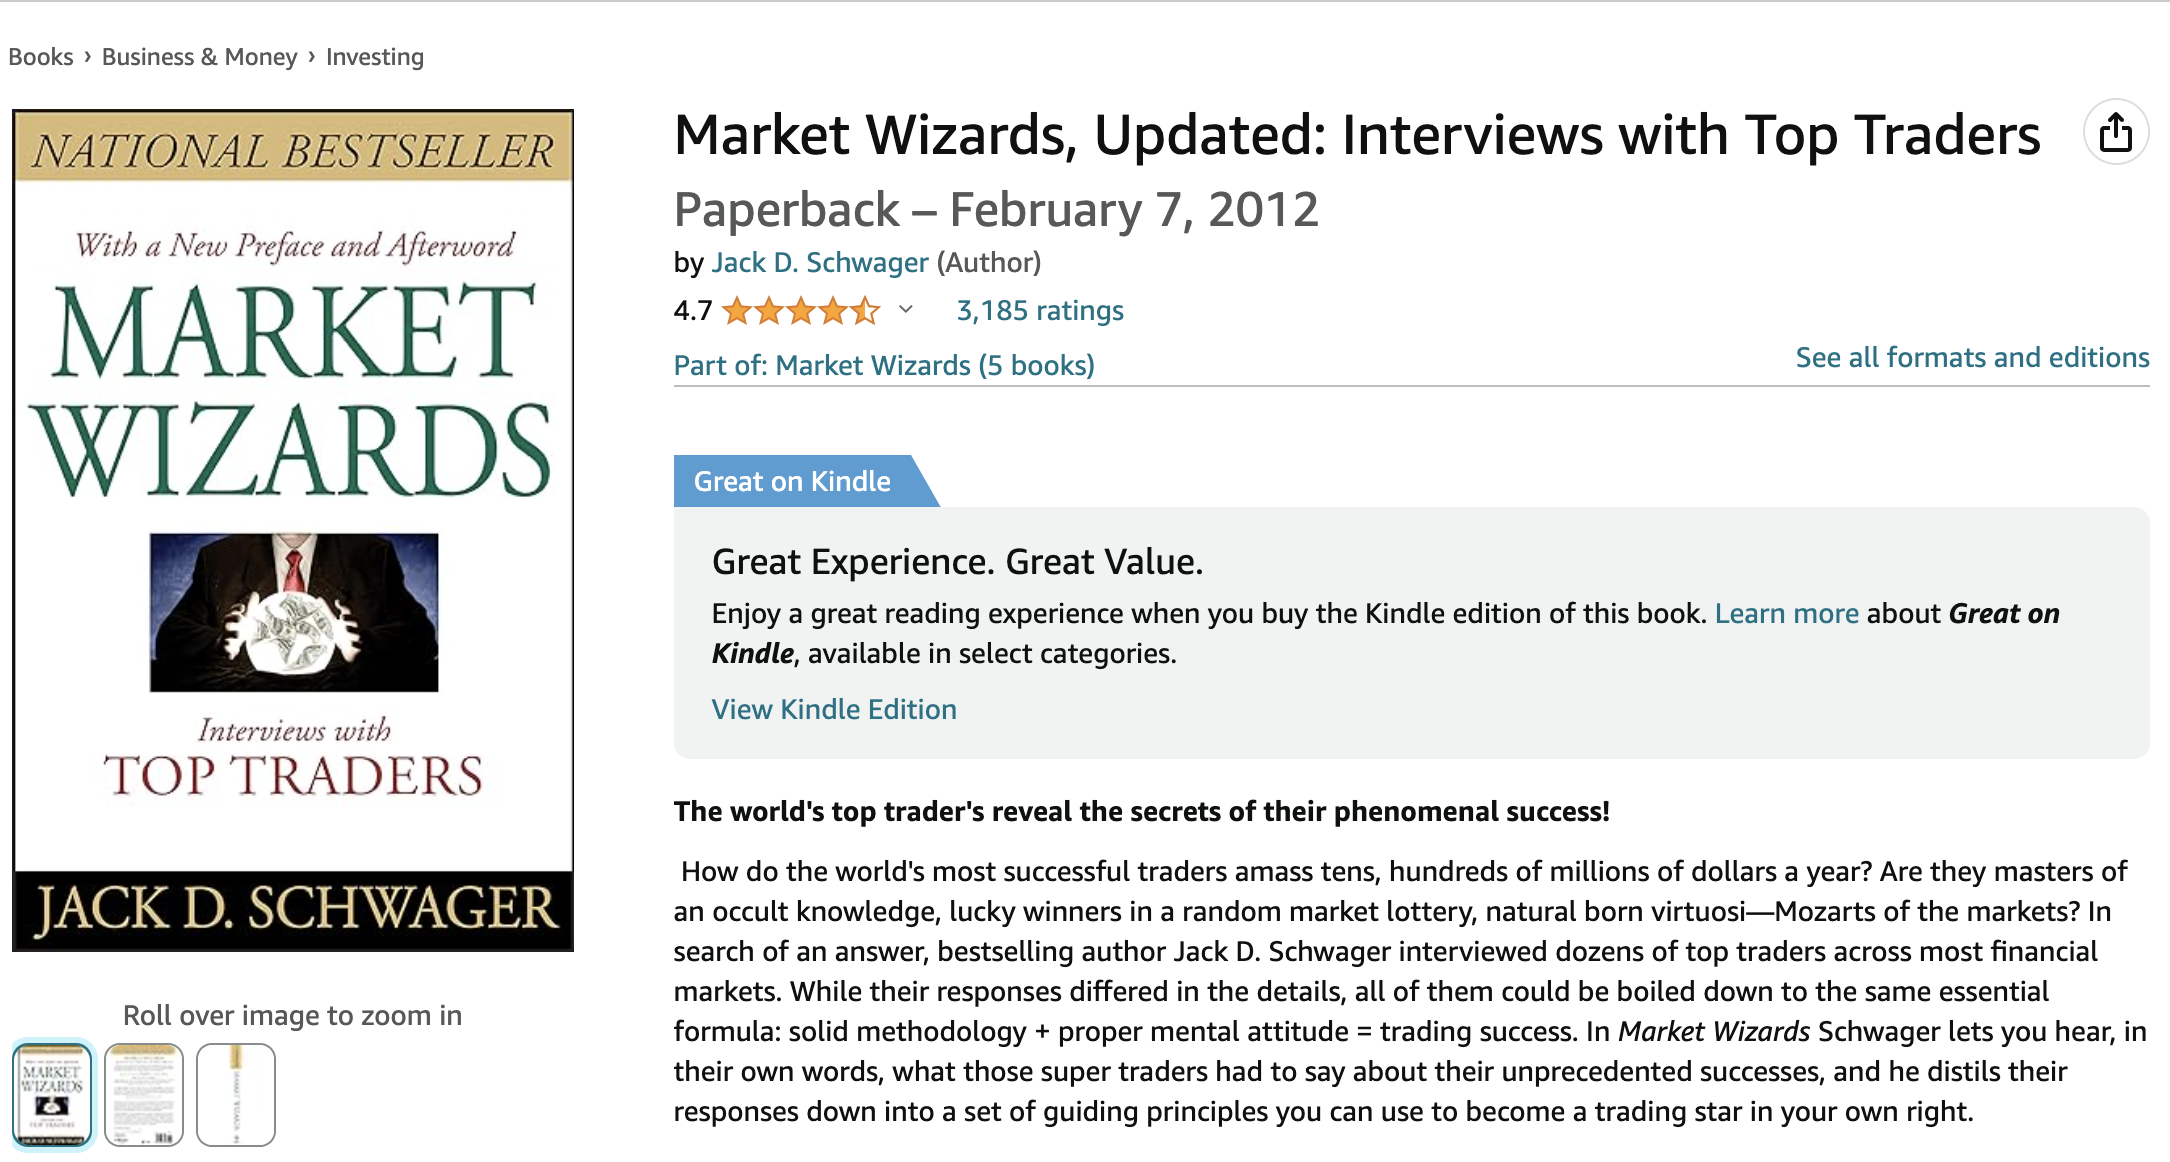 Books for Stock Traders: “Market Wizards” by Jack D. Schwager